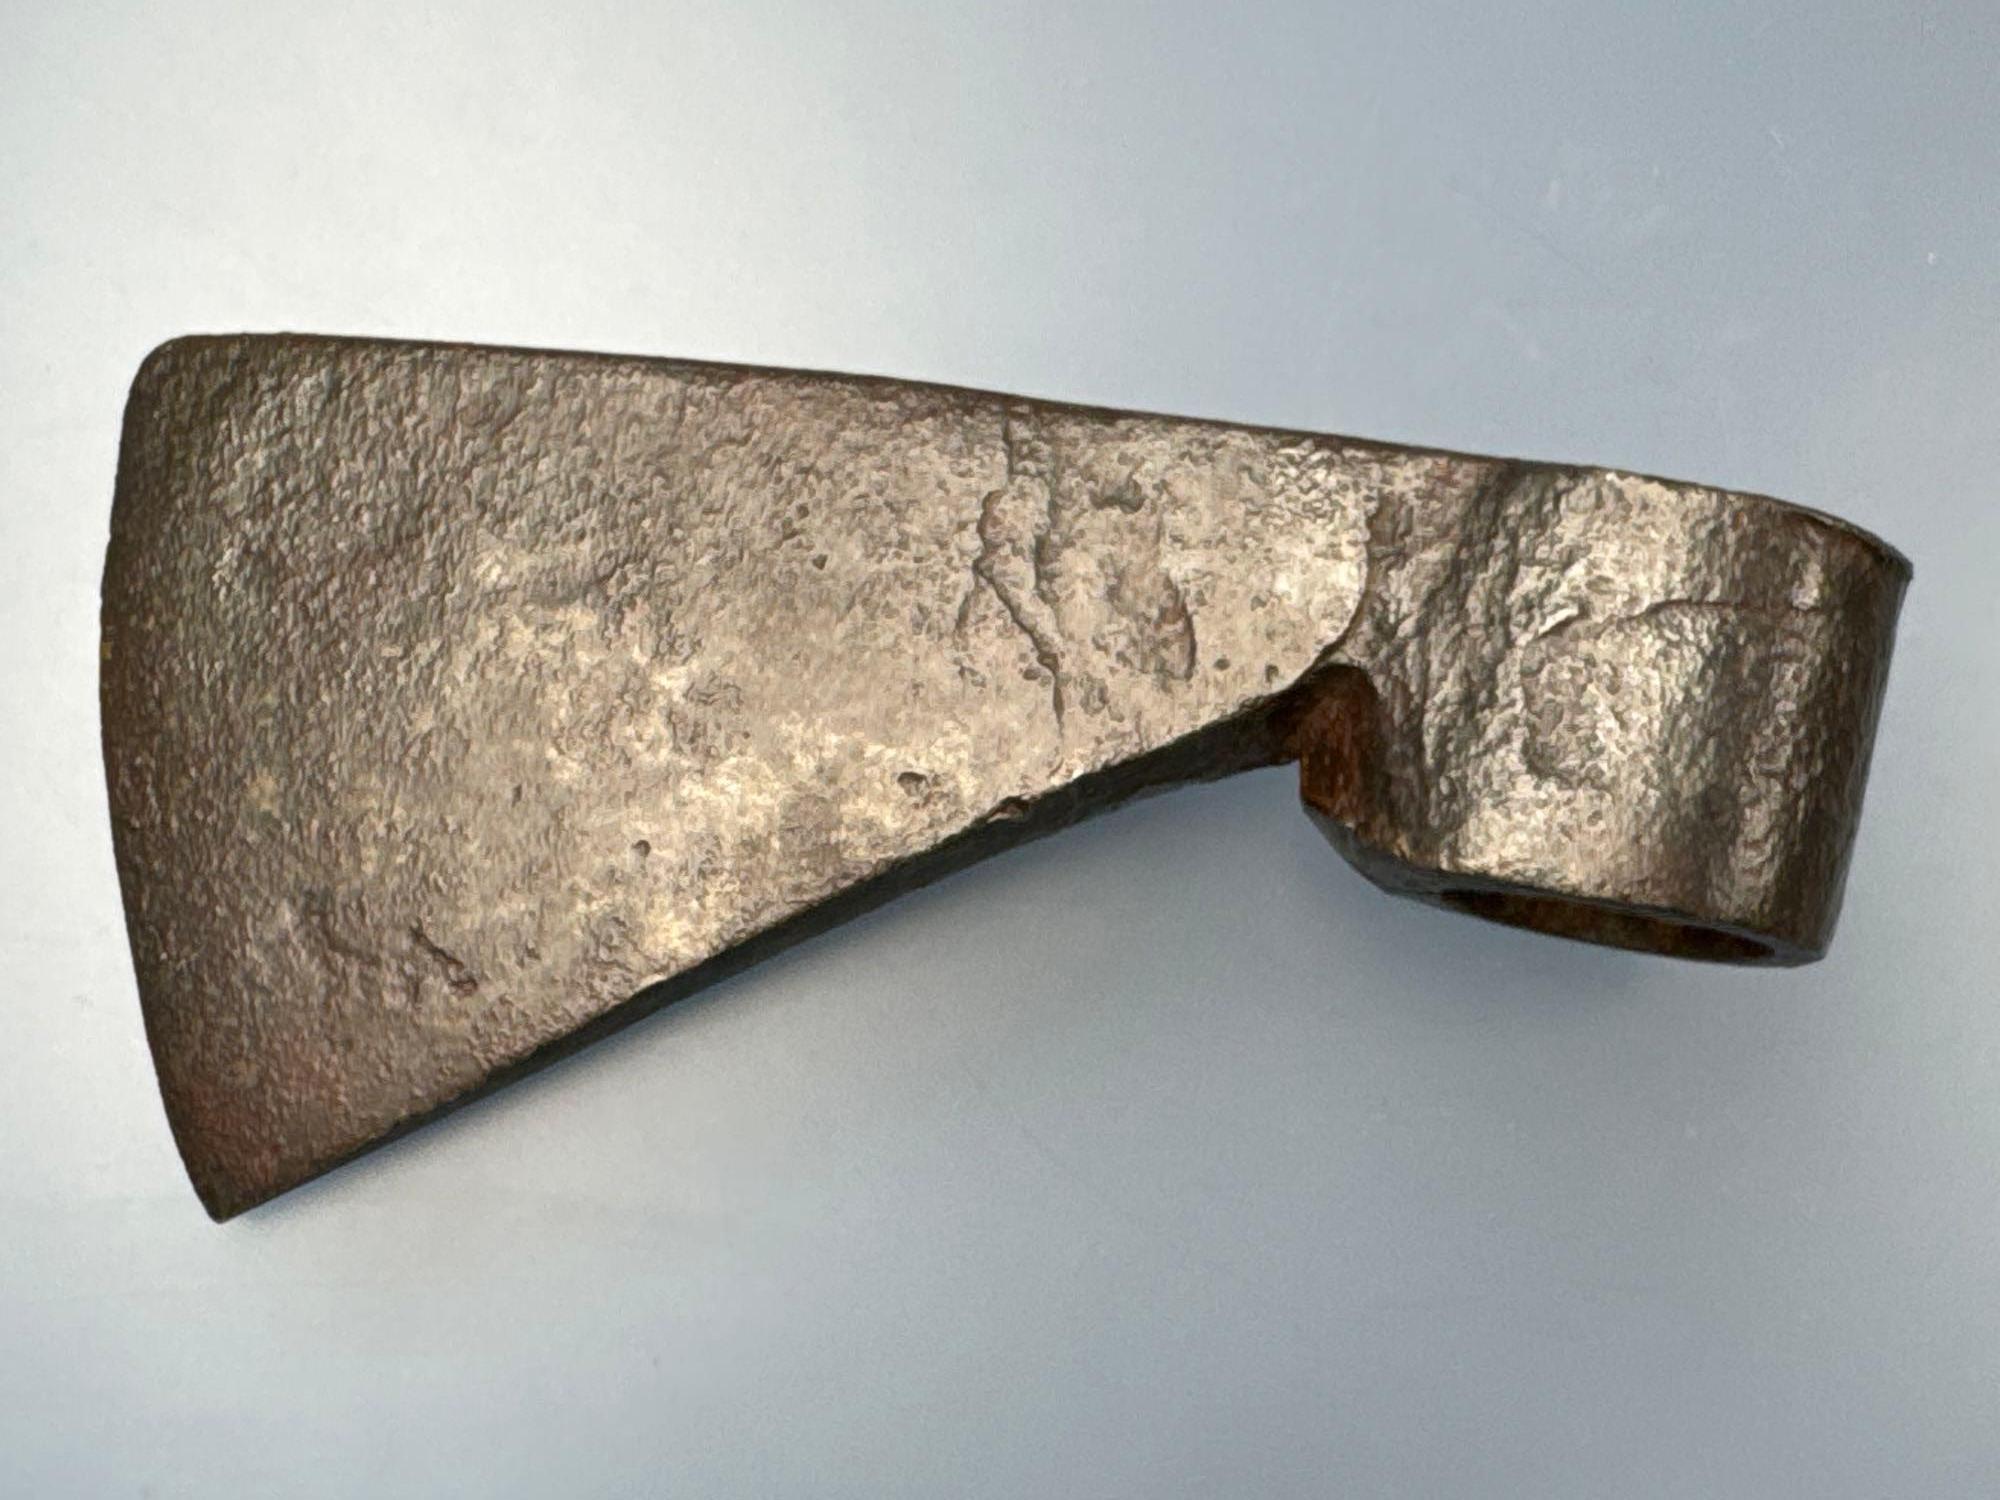 MASSIVE 8" Iron Trade Axe, Excellent Condition Overall, Found in New York, Large Example of an Early